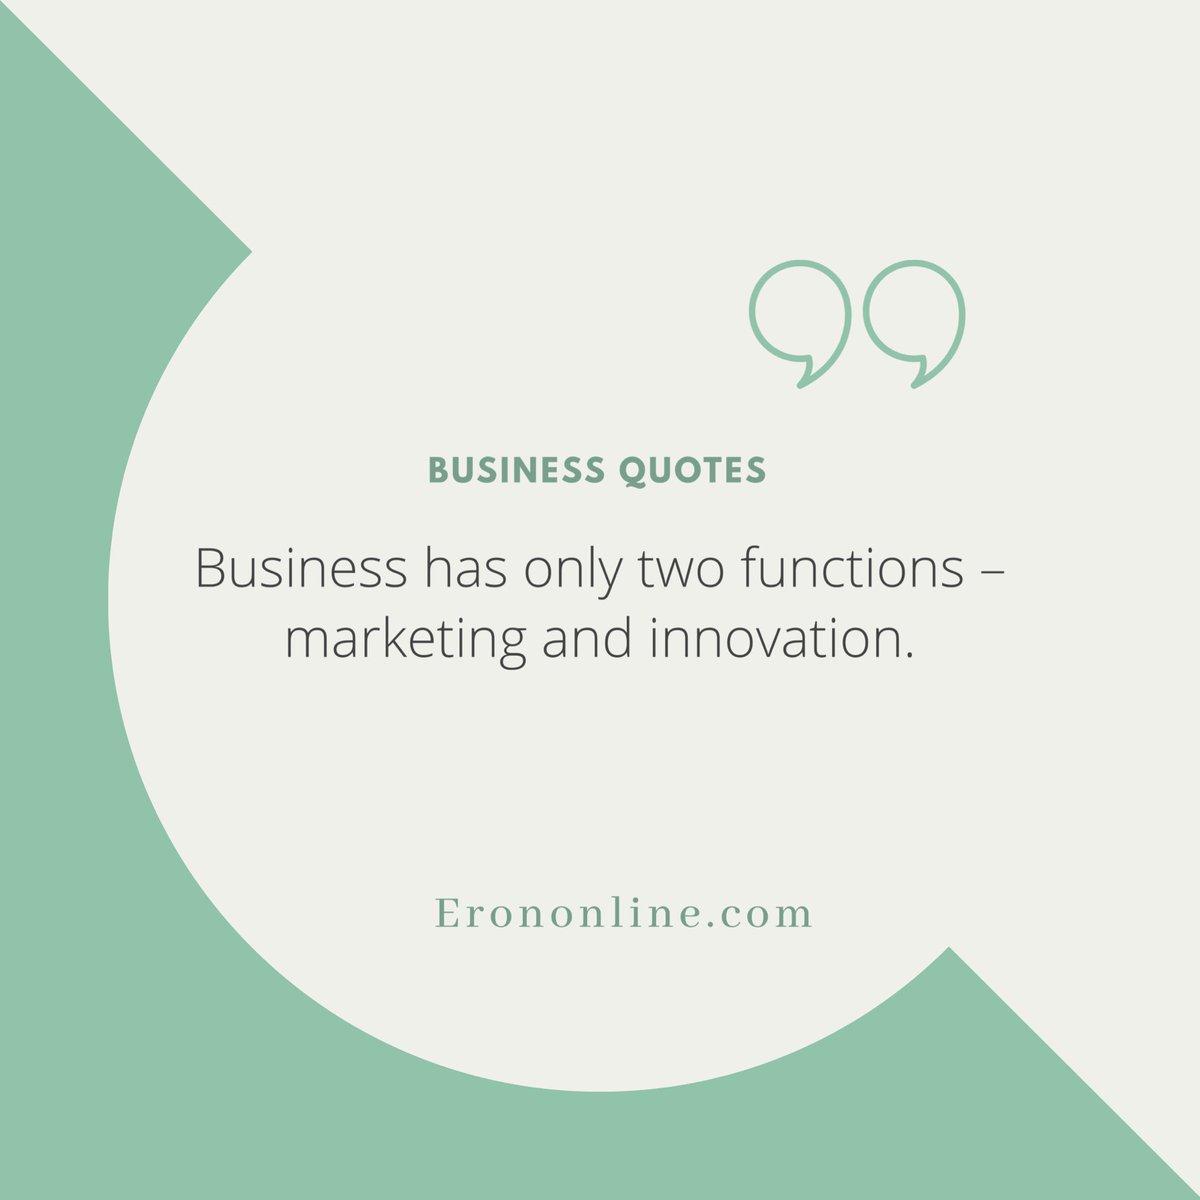 Business has only two functions- marketing and innovation. 

#onlinebusiness #moneysuccess #financialliteracy #ERONONLINE #buyers #sellers #onlinebusinessplatform